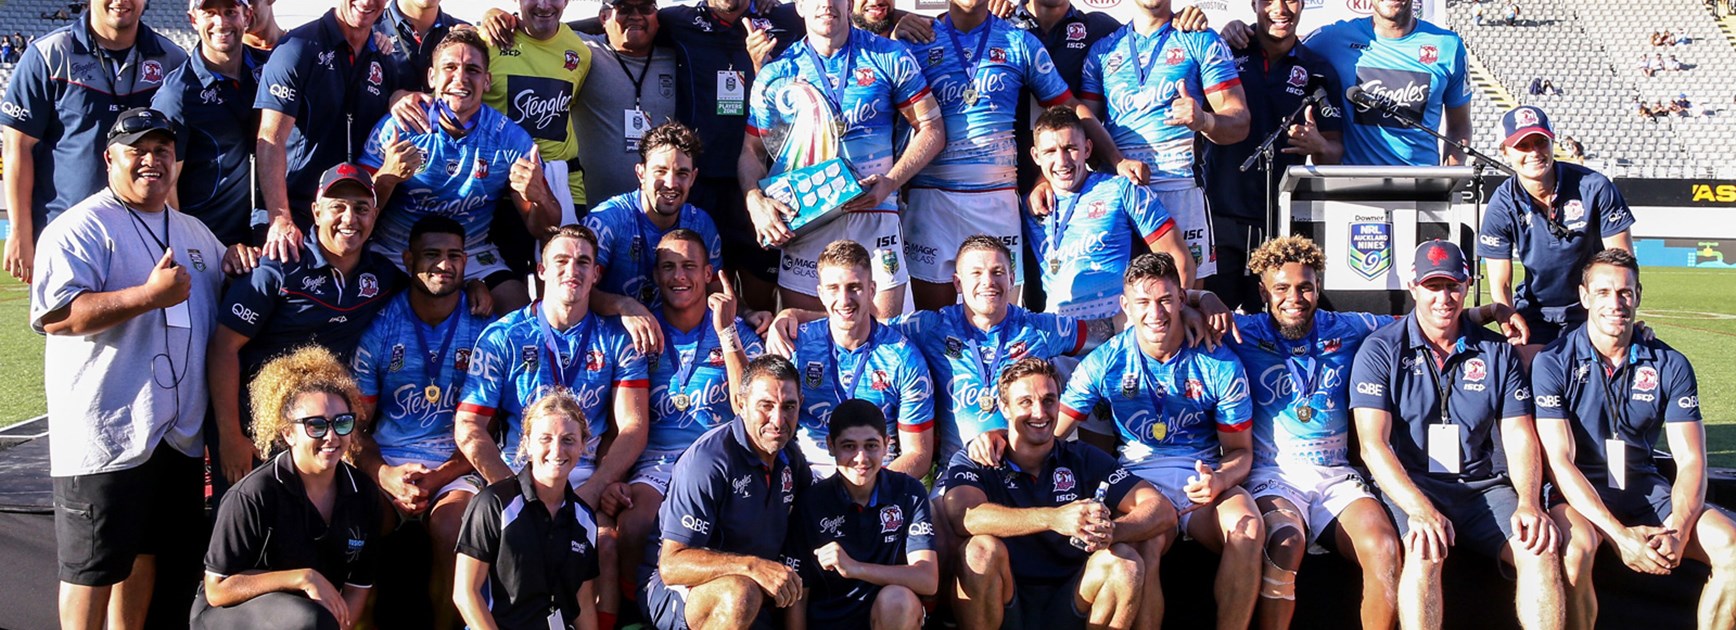 2017 Downer NRL Auckland Nines champions the Sydney Roosters.